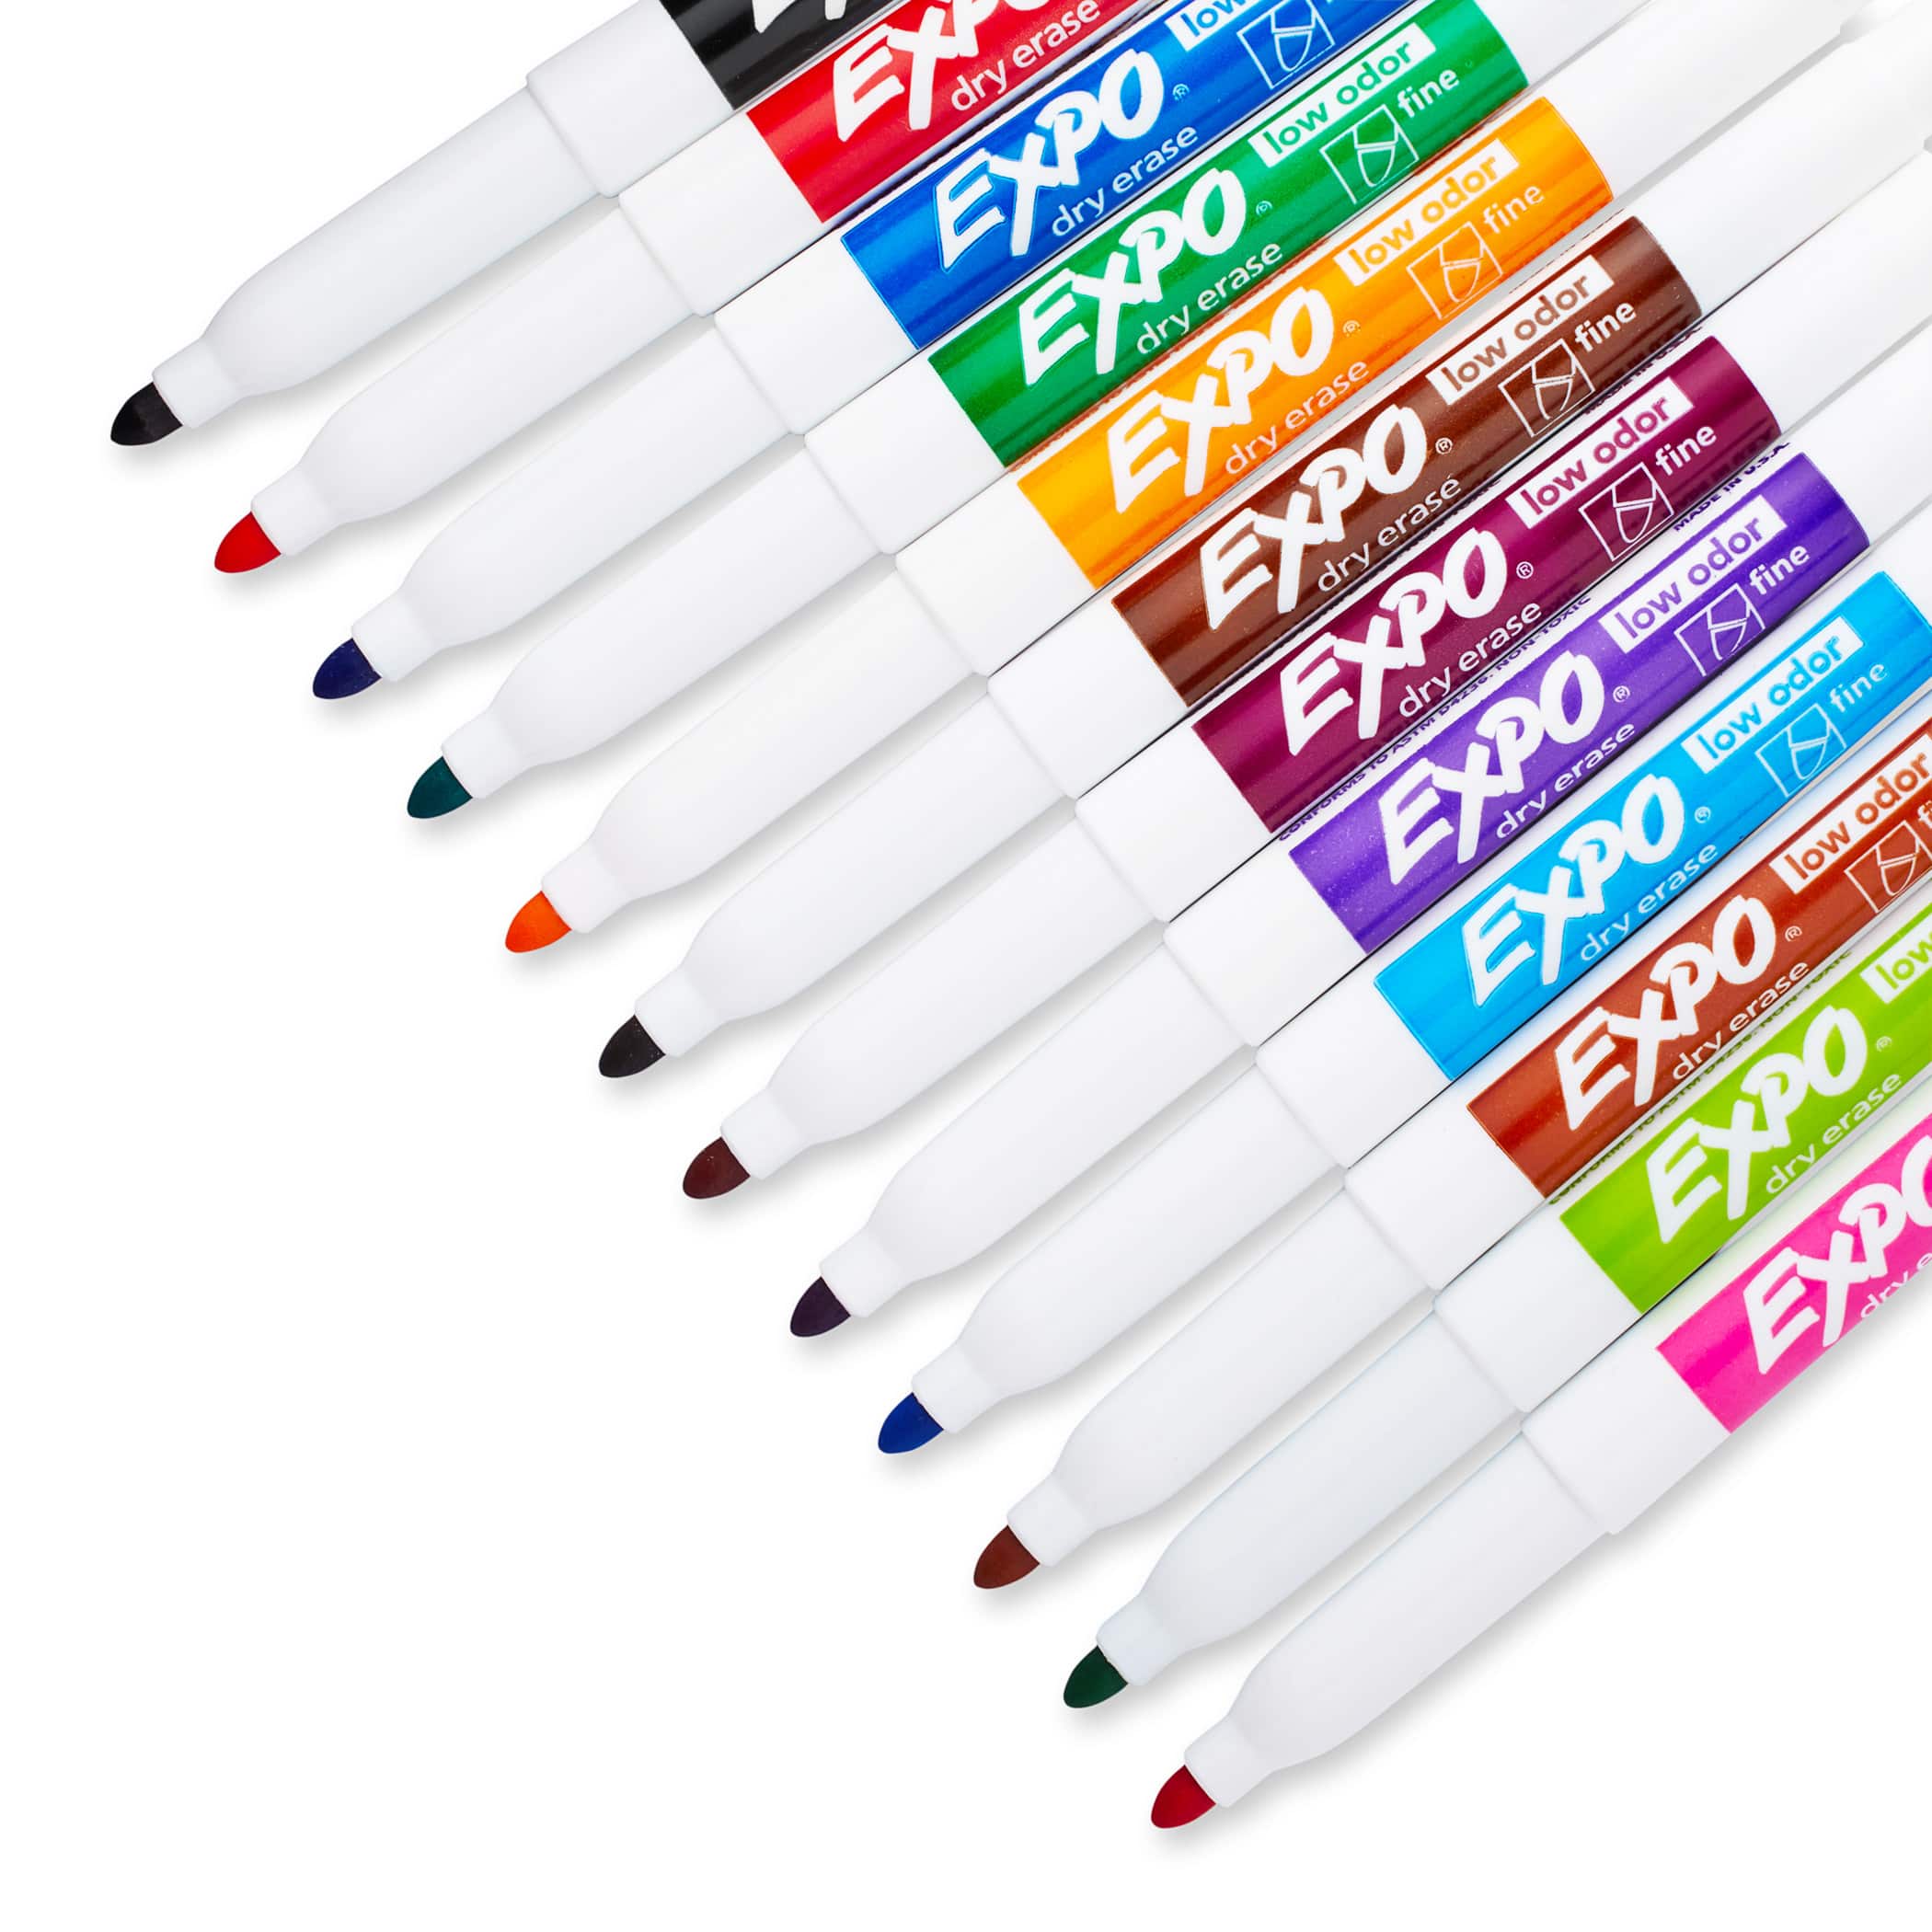 SAYEEC Magnetic Dry Erase Markers Fine Tip, 12 Colors Whiteboard Markers  with Eraser Cap, Low Odor White Board Markers Dry Erase Marker Magic  Painting